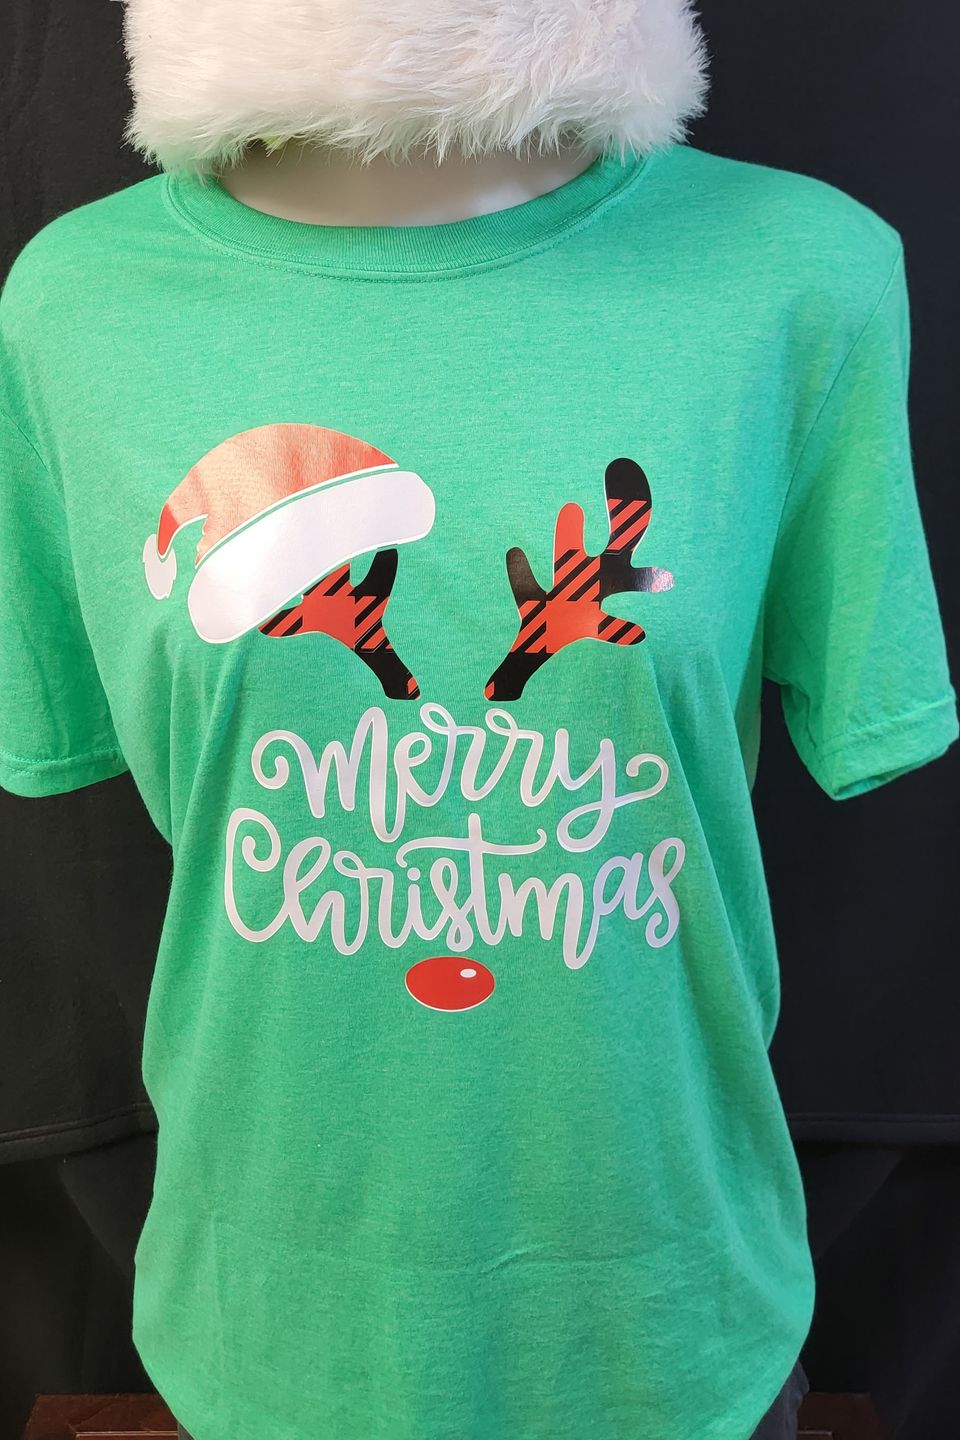 "DTF Direct-to-Film" example from SaRi's Creations - "Merry Christmas" with antlers on a green t-shirt